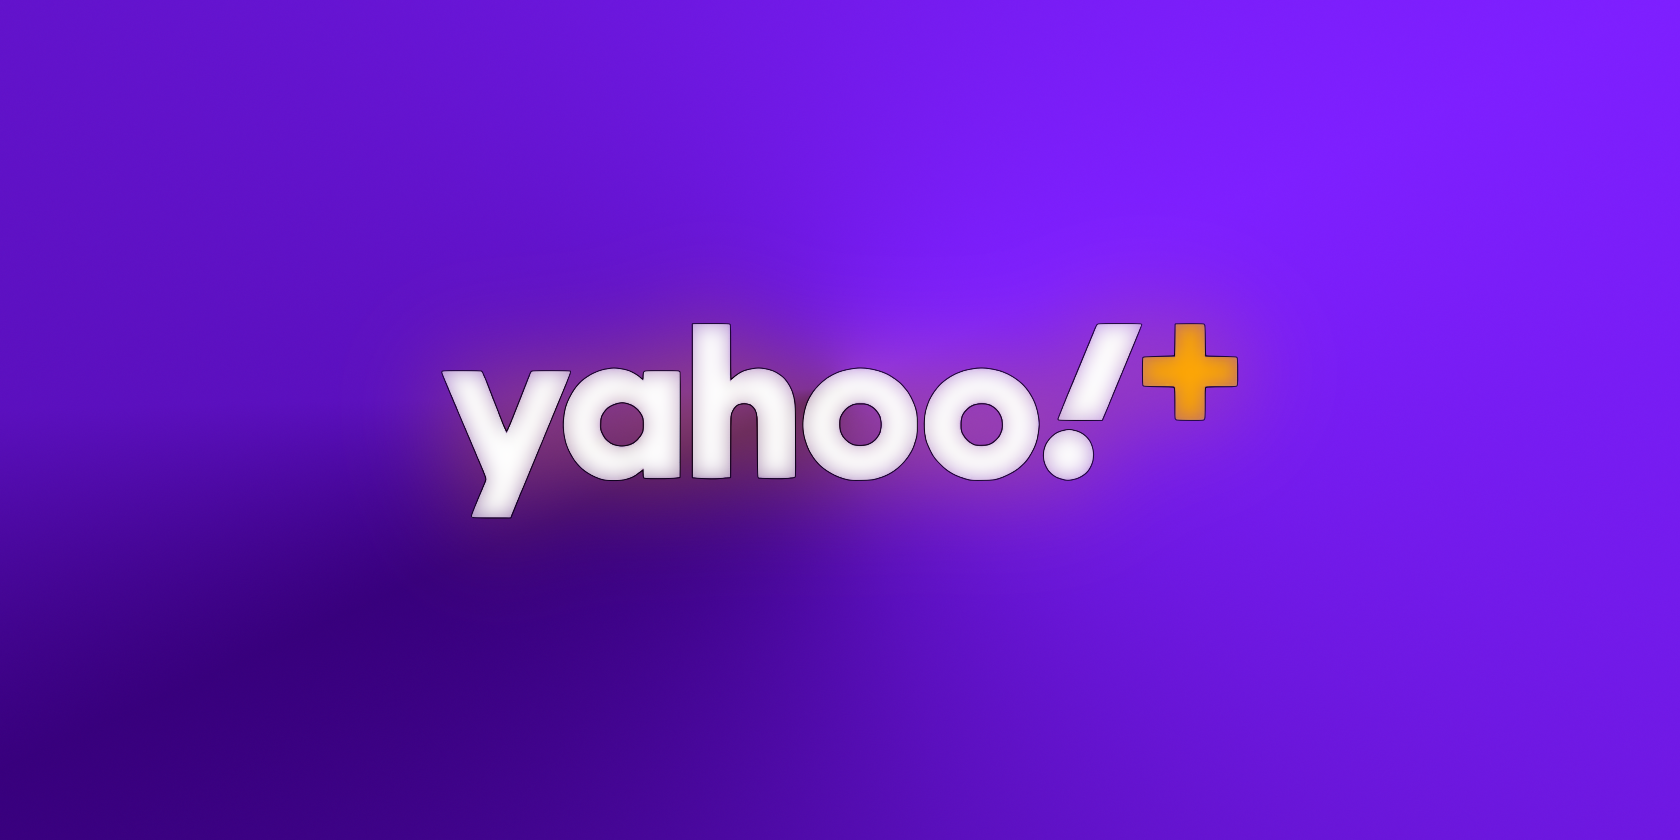 An illustration showing a white Yahoo Plus logo set against a purple-shaded background